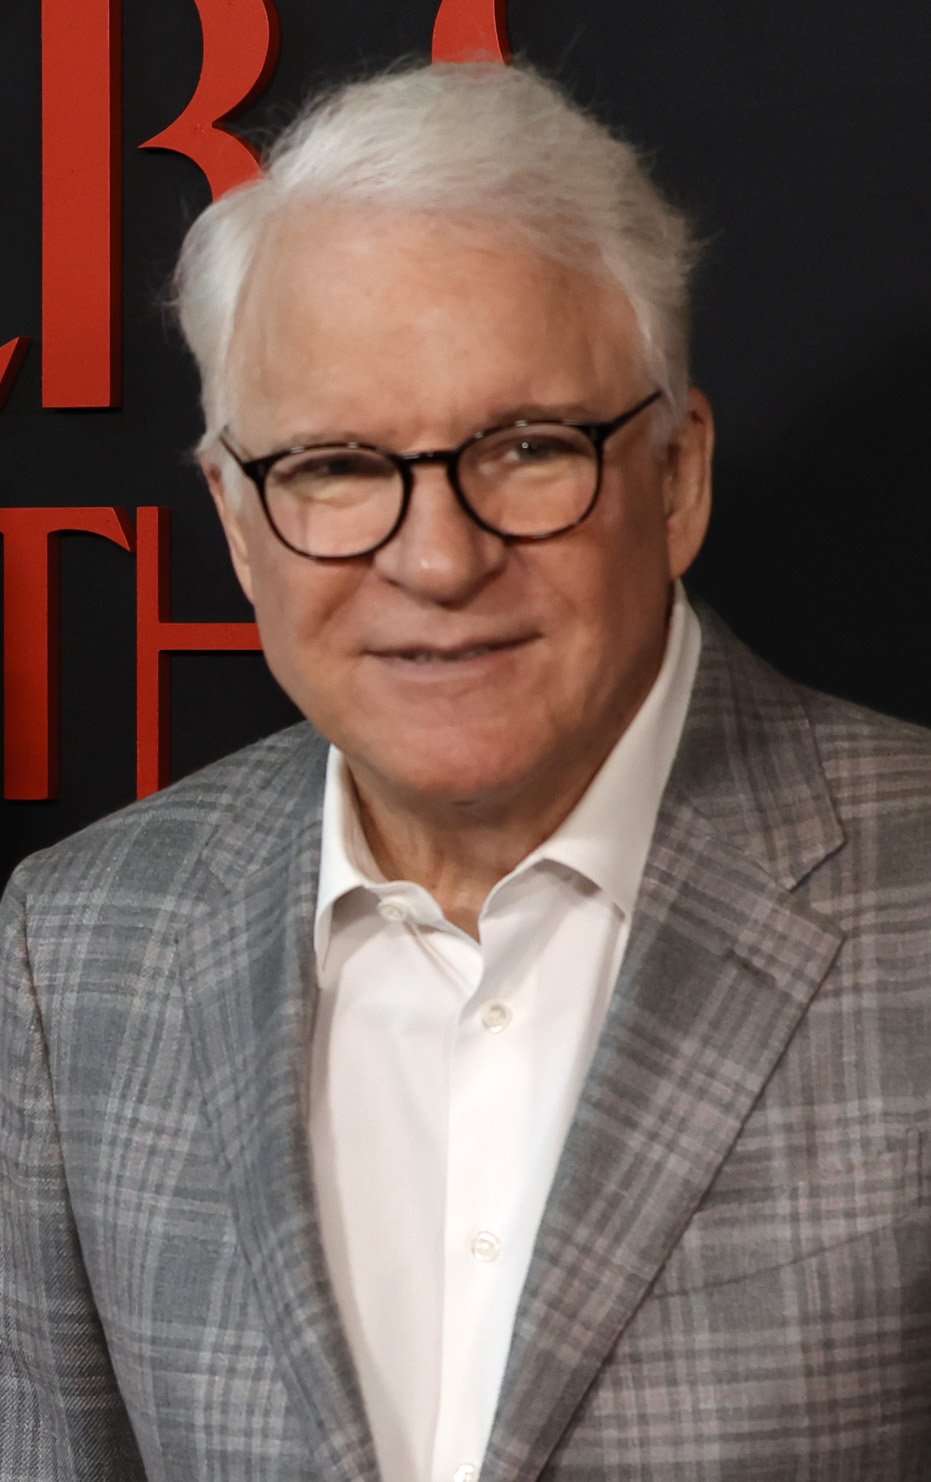  Steve Martin attends Los Angeles Premiere Of "Only Murders In The Building" Season 2 on June 27, 2022 in Los Angeles, California. | Source: Getty Images